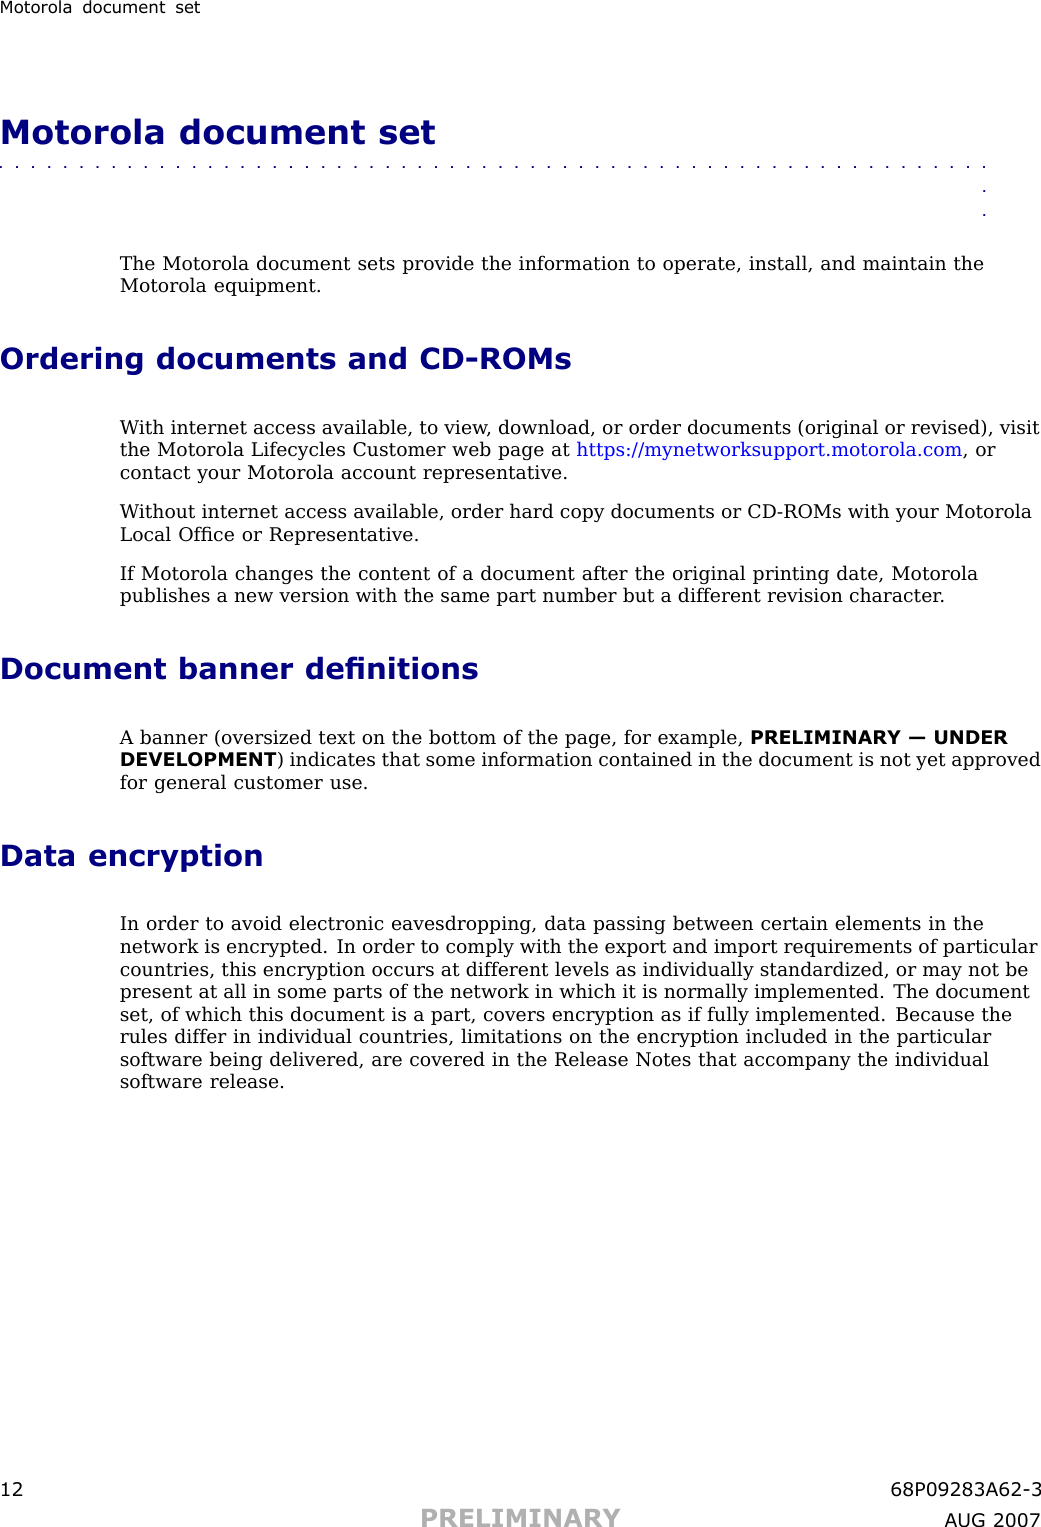 Motorola document setMotorola document set■■■■■■■■■■■■■■■■■■■■■■■■■■■■■■■■■■■■■■■■■■■■■■■■■■■■■■■■■■■■■■■■The Motorola document sets provide the information to operate, install, and maintain theMotorola equipment.Ordering documents and CD -ROMsW ith internet access available, to view , download, or order documents (original or revised), visitthe Motorola Lifecycles Customer web page at https://mynetworksupport.motorola.com , orcontact your Motorola account representative.W ithout internet access available, order hard copy documents or CD -ROMs with your MotorolaLocal Ofﬁce or Representative.If Motorola changes the content of a document after the original printing date, Motorolapublishes a new version with the same part number but a different revision character .Document banner denitionsA banner (oversized text on the bottom of the page, for example, PRELIMINARY — UNDERDEVELOPMENT ) indicates that some information contained in the document is not yet approvedfor general customer use.Data encryptionIn order to avoid electronic eavesdropping, data passing between certain elements in thenetwork is encrypted. In order to comply with the export and import requirements of particularcountries, this encryption occurs at different levels as individually standardized, or may not bepresent at all in some parts of the network in which it is normally implemented. The documentset, of which this document is a part, covers encryption as if fully implemented. Because therules differ in individual countries, limitations on the encryption included in the particularsoftware being delivered, are covered in the Release Notes that accompany the individualsoftware release.12 68P09283A62 -3PRELIMINARY A UG 2007